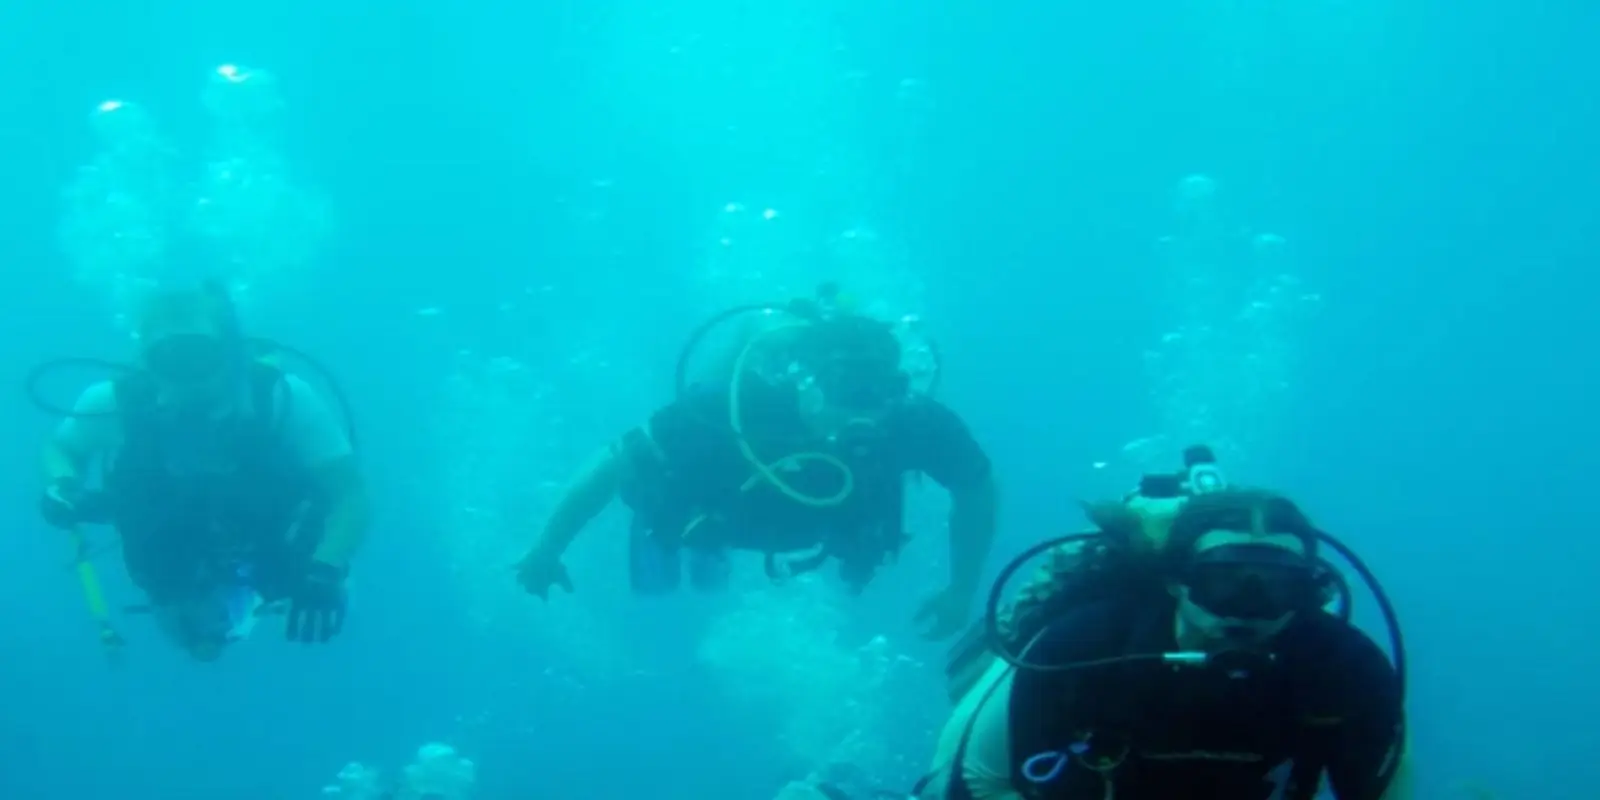 Scuba Diving in North Carolina Made Possible for Fort Liberty Residents